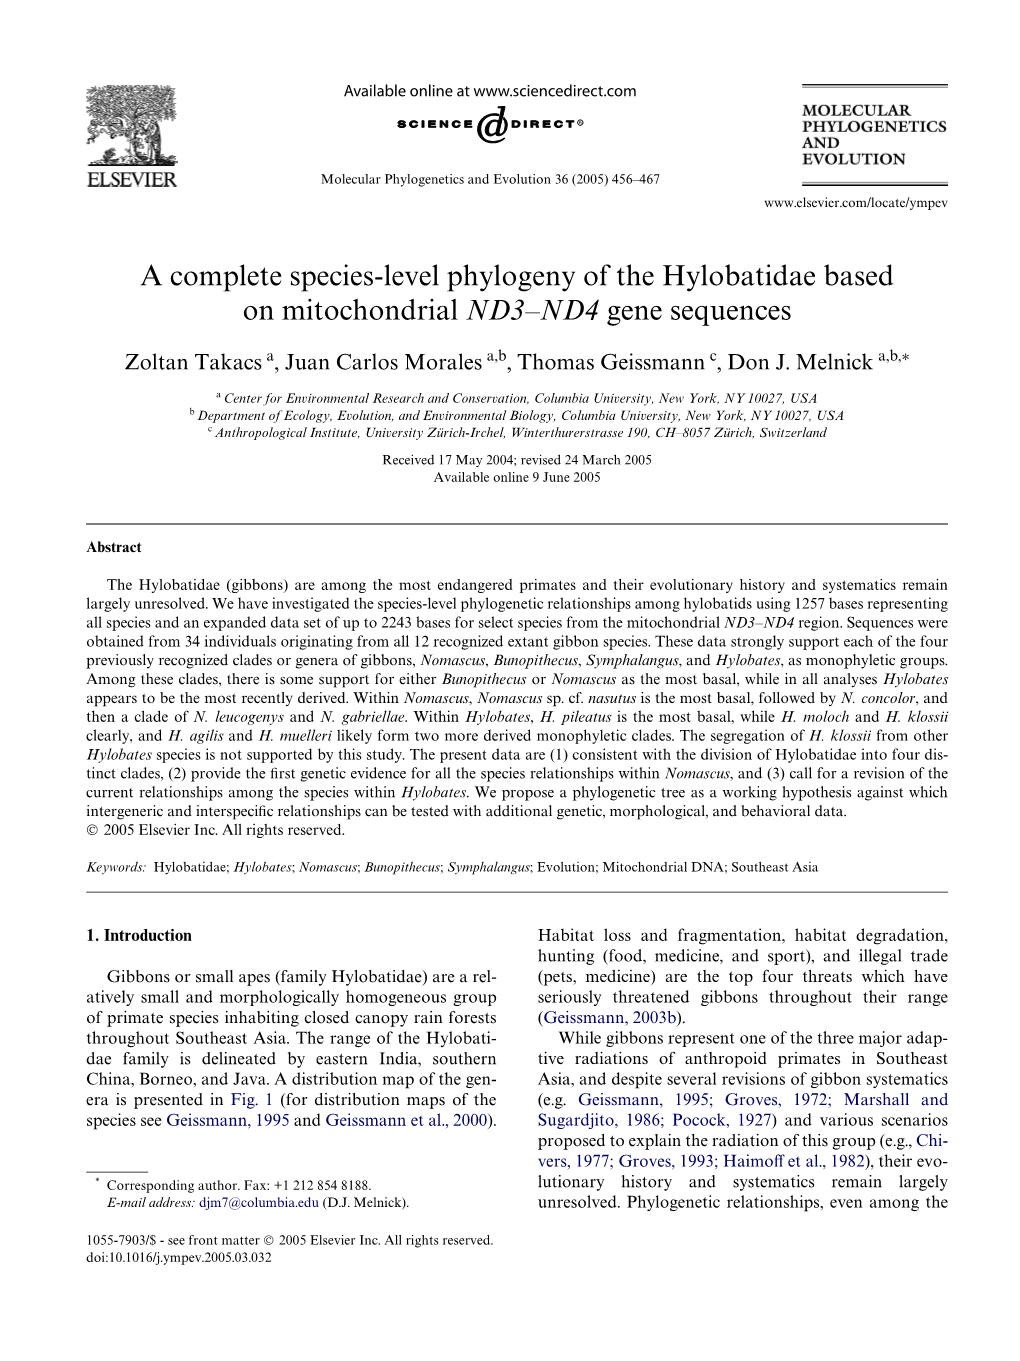 A Complete Species-Level Phylogeny of the Hylobatidae Based on Mitochondrial ND3–ND4 Gene Sequences